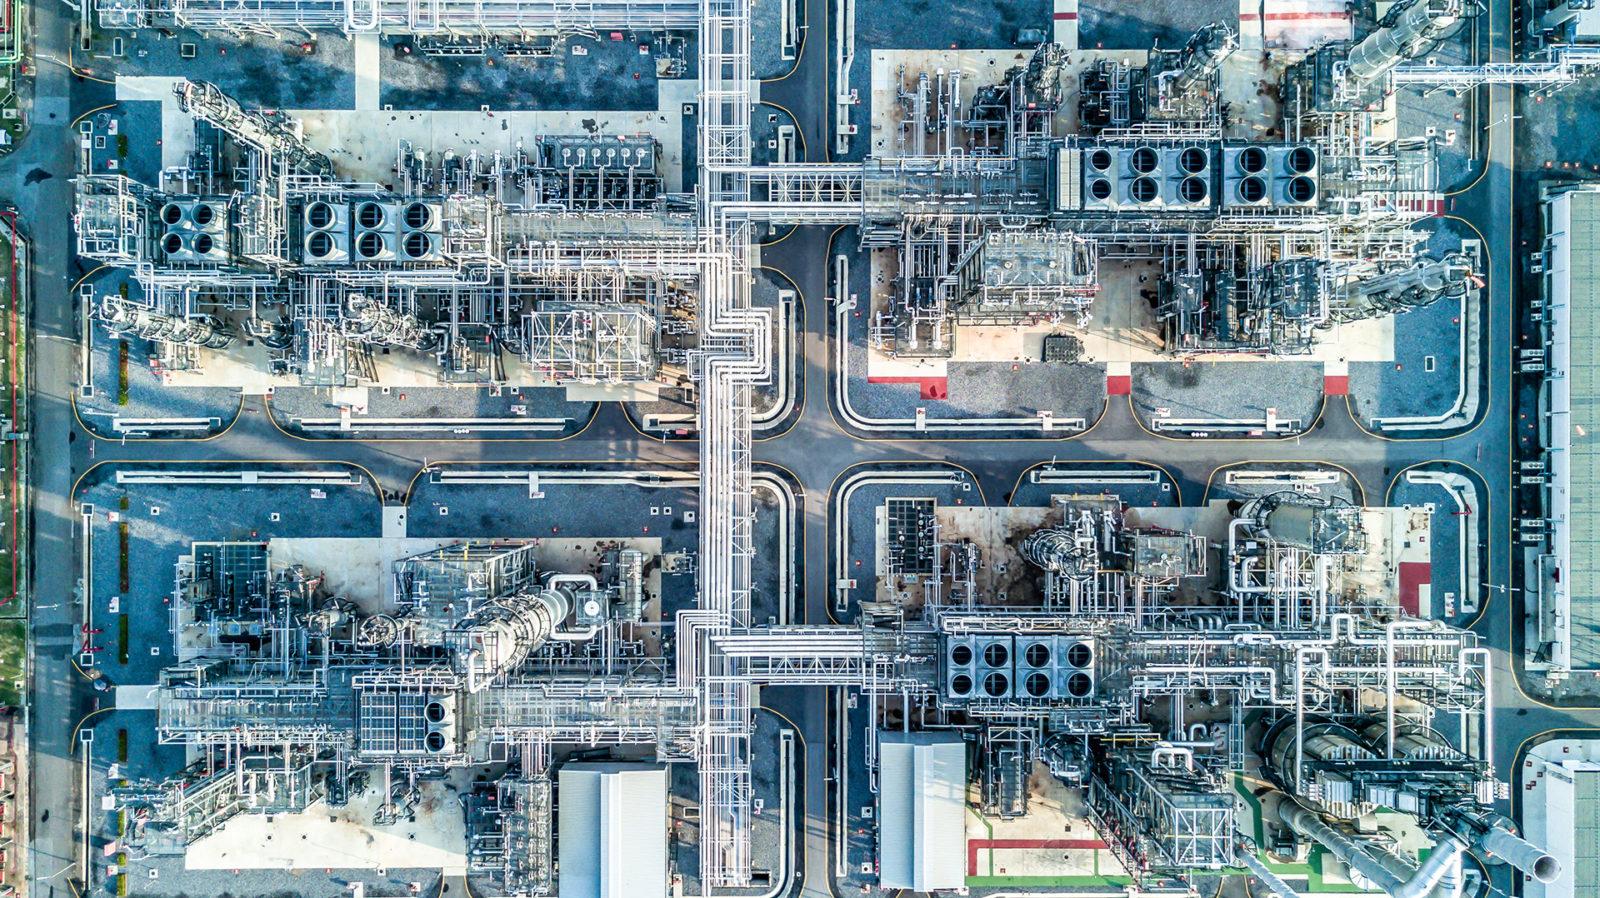 Aerial of an oil refinery.